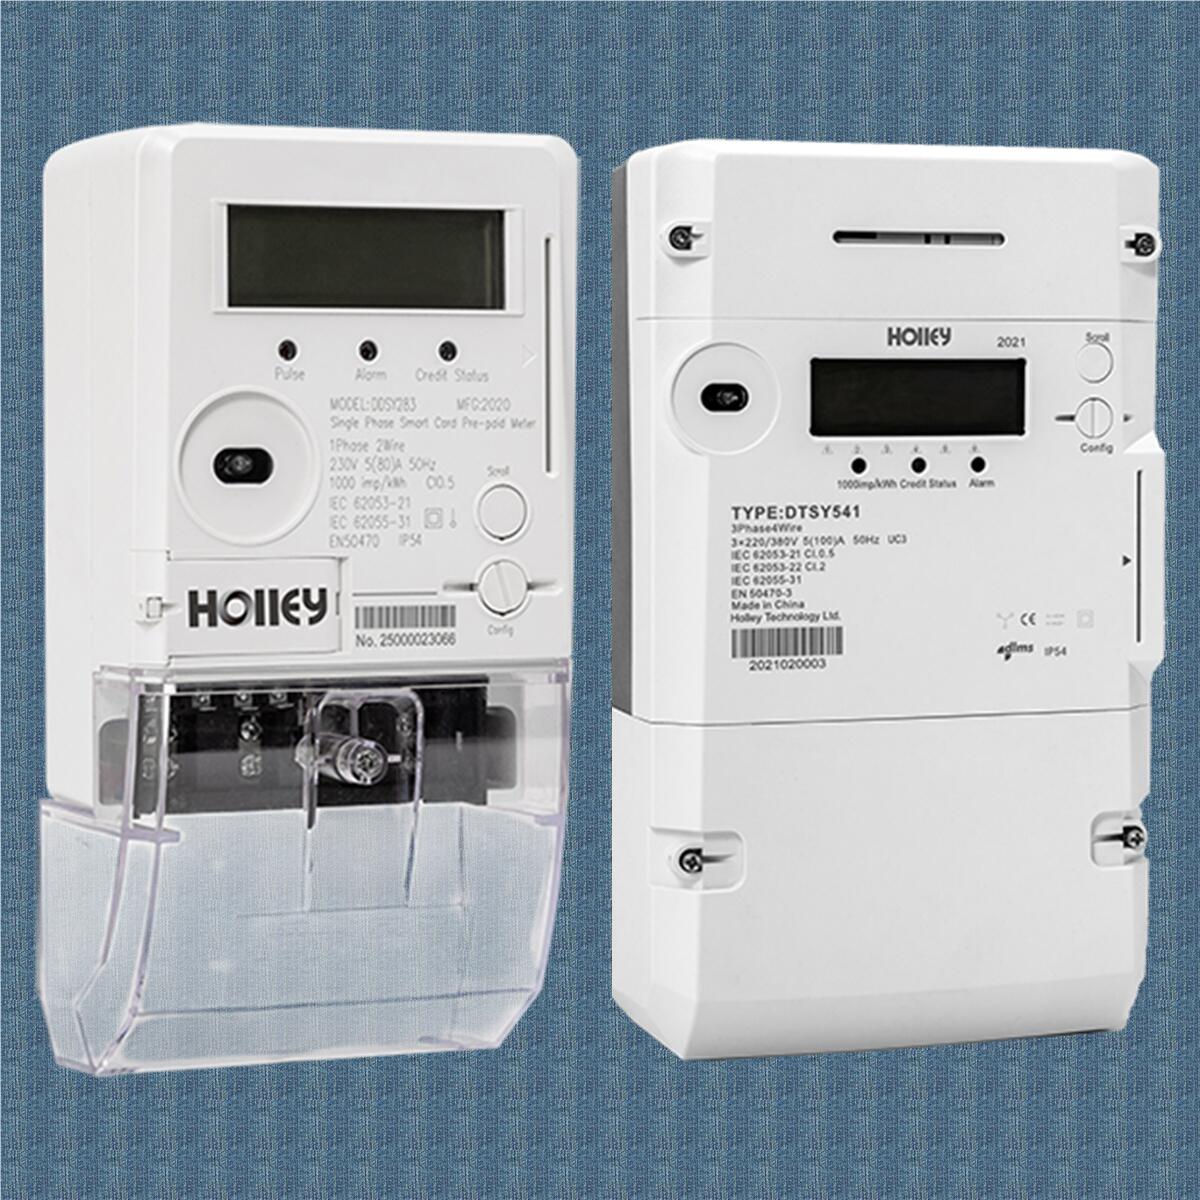 In 2021-2028, the global commercial IC card power smart meter market is booming